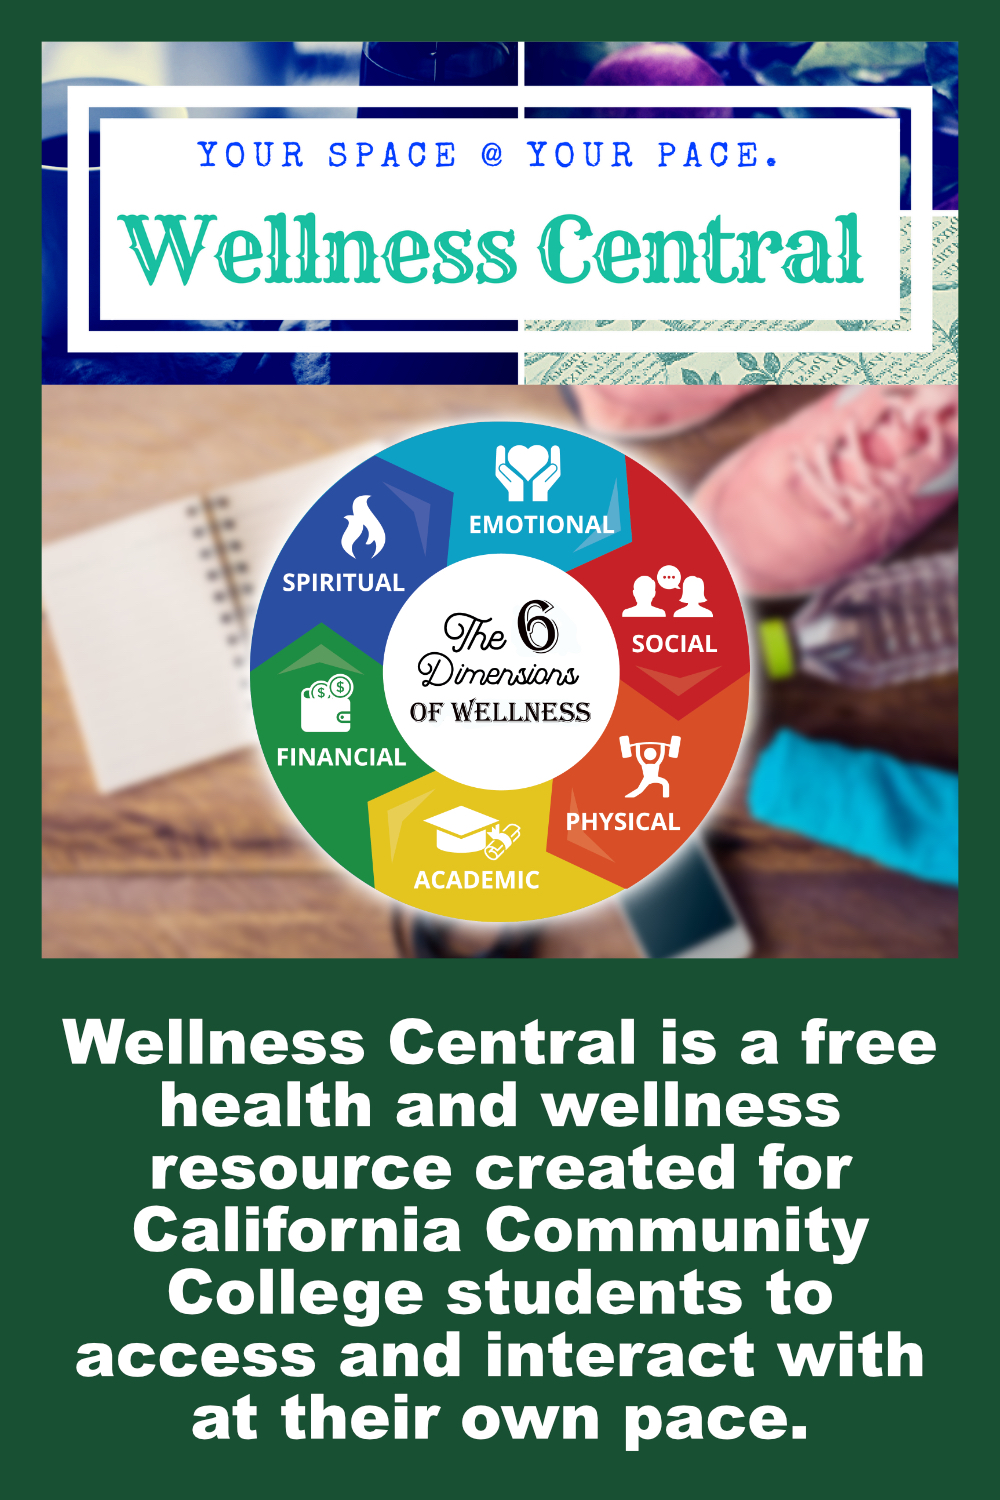 Wellness Central is a free health and wellness resource created for California Community College students to access and interact with at their own pace.